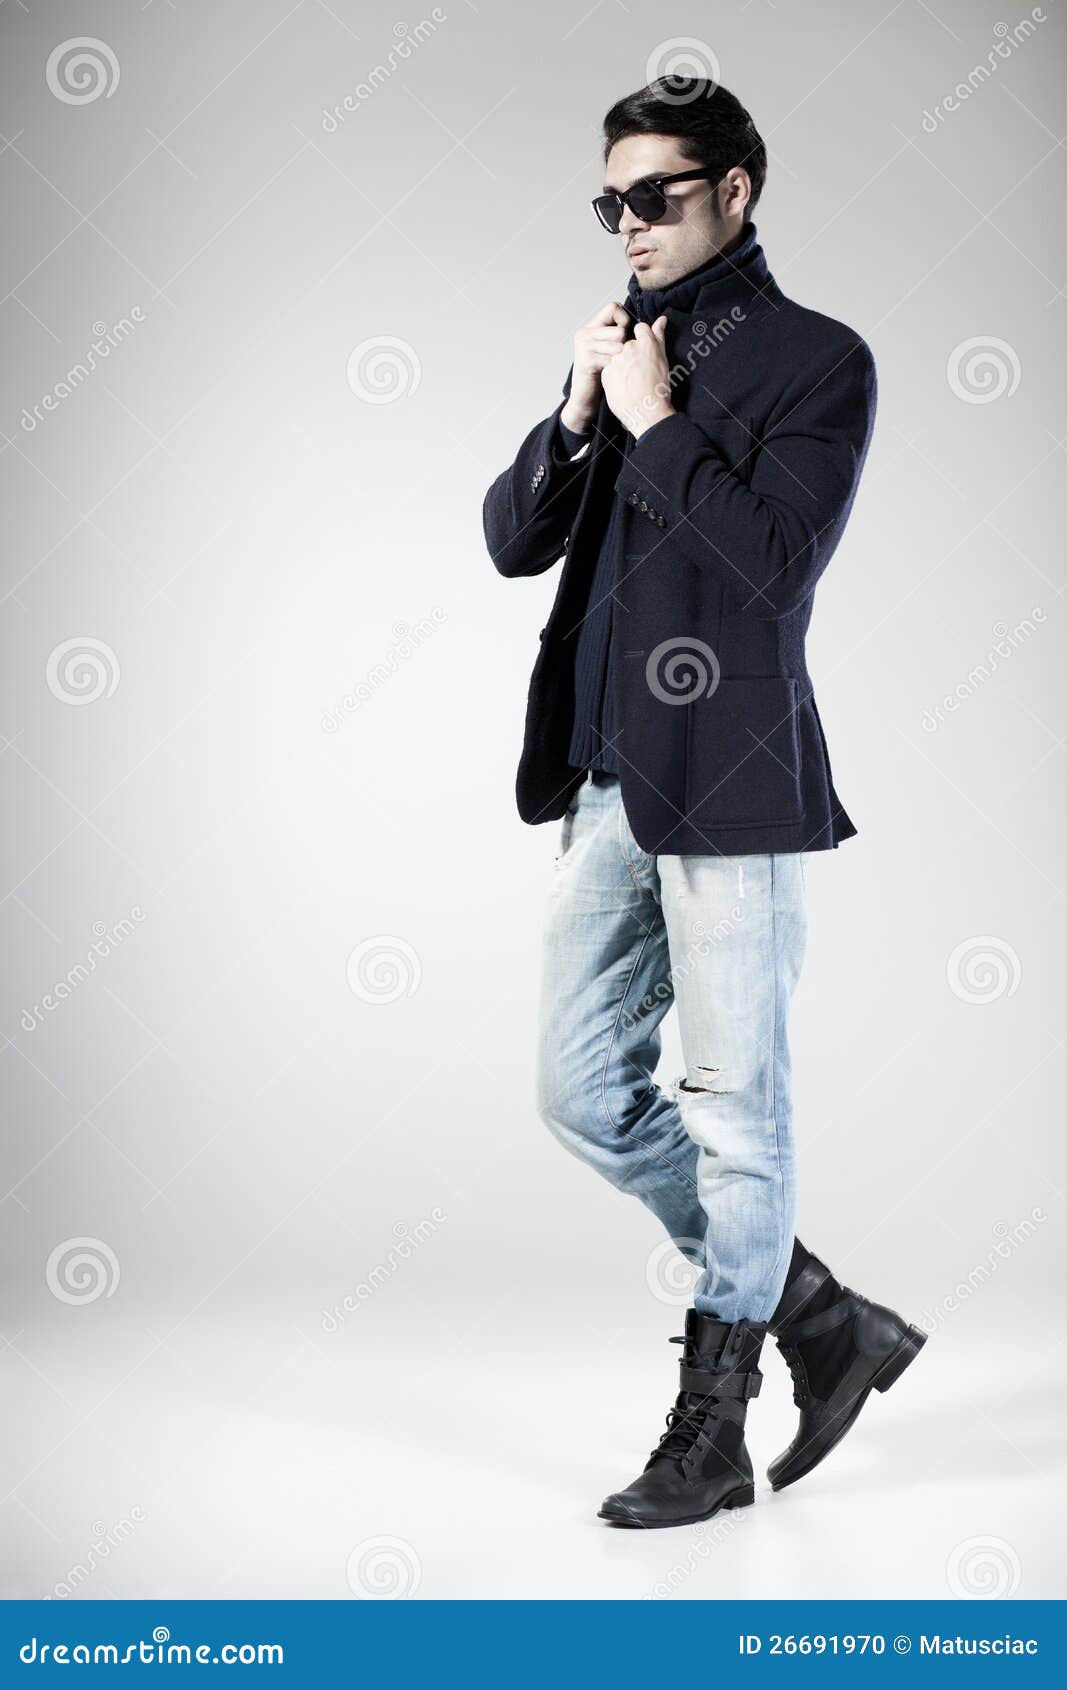 Cool Full Body Attractive Full Body Male Model Poses